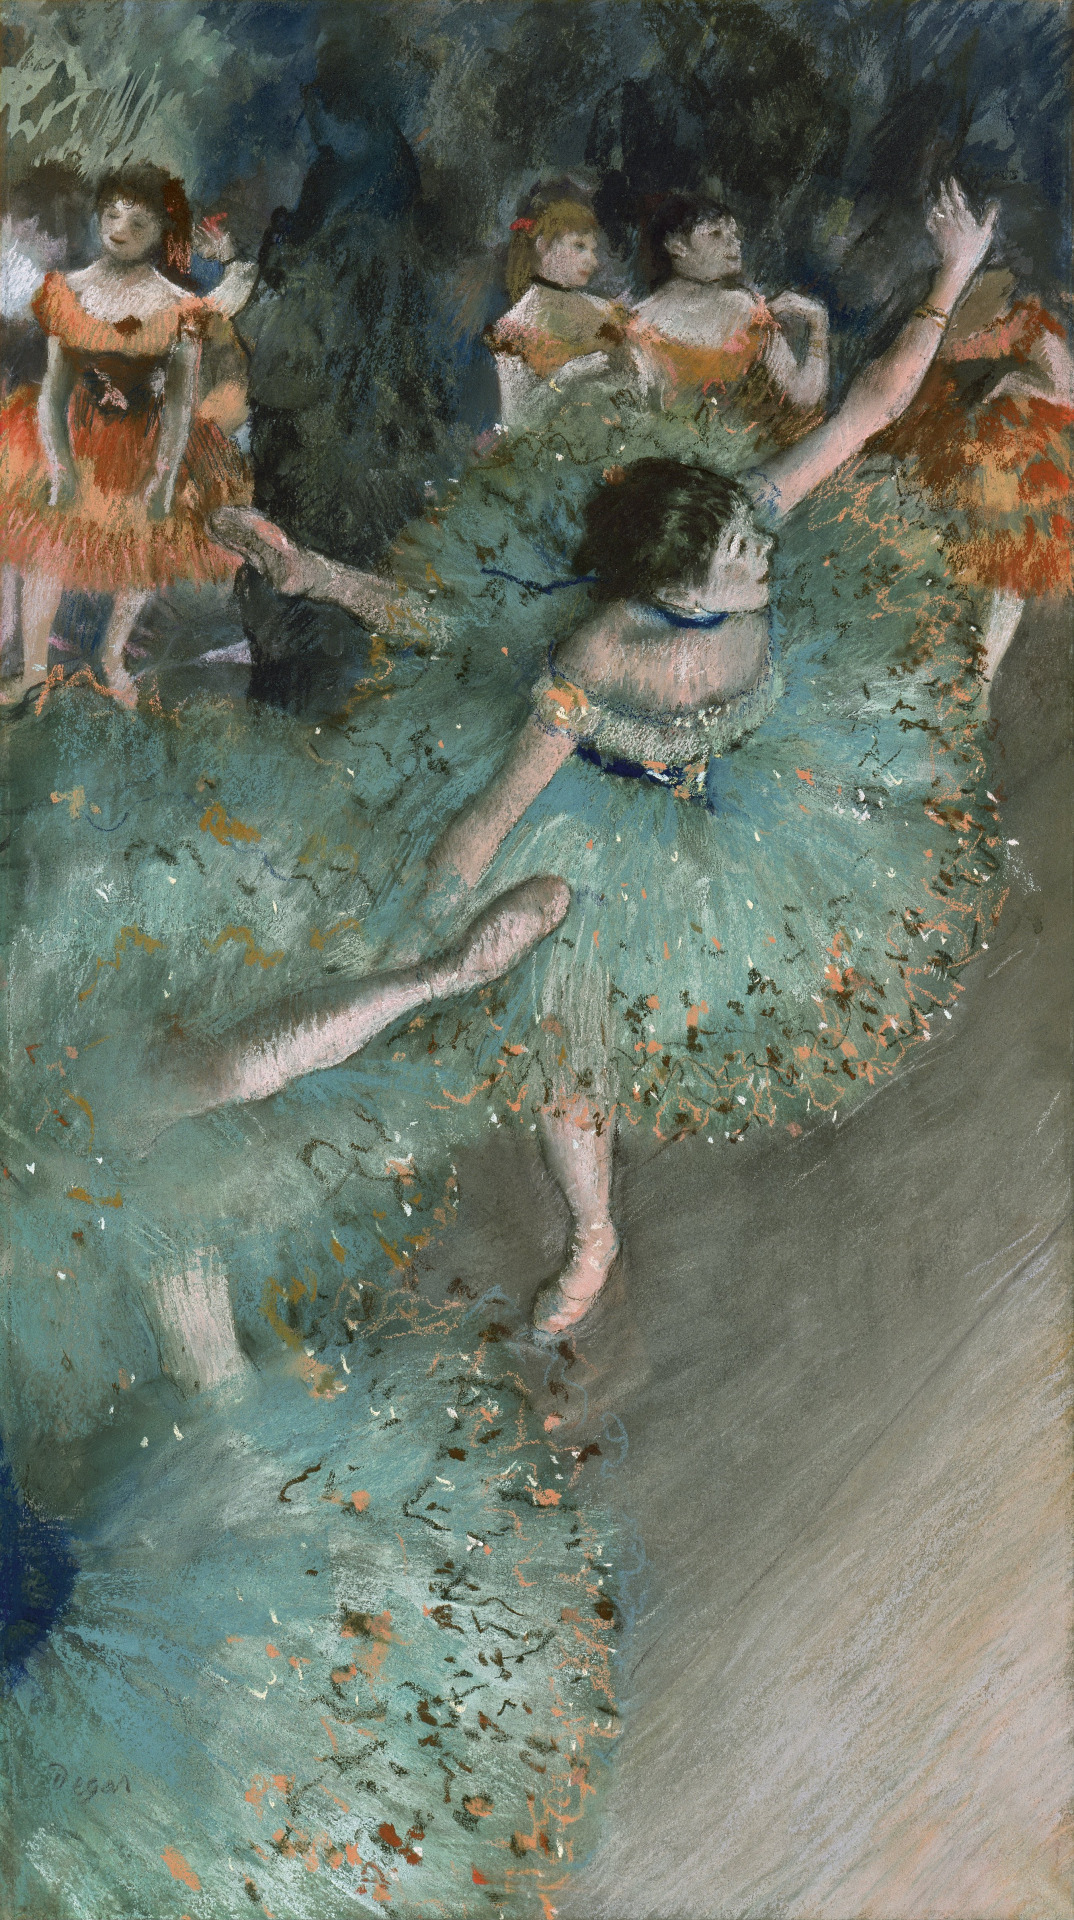 books0977:

Swaying Dancer (Dancer in Green) [1877-79]. Edgar Degas (French, 1834-1917). Pastel and gouache on paper. Museo Thyssen-Bornemisza.
The group of dancers is depicted in mid-performance, as viewed from an upper side box. Only one of the girls in green is shown full-length, captured as she executes a swift, complicated turn. Degas felt that the unfinished, transitory nature of reality could only be conveyed using a fragmented technique. Here, the fleeting nature of the movements is captured with rapid pastel strokes, applied with skill.
